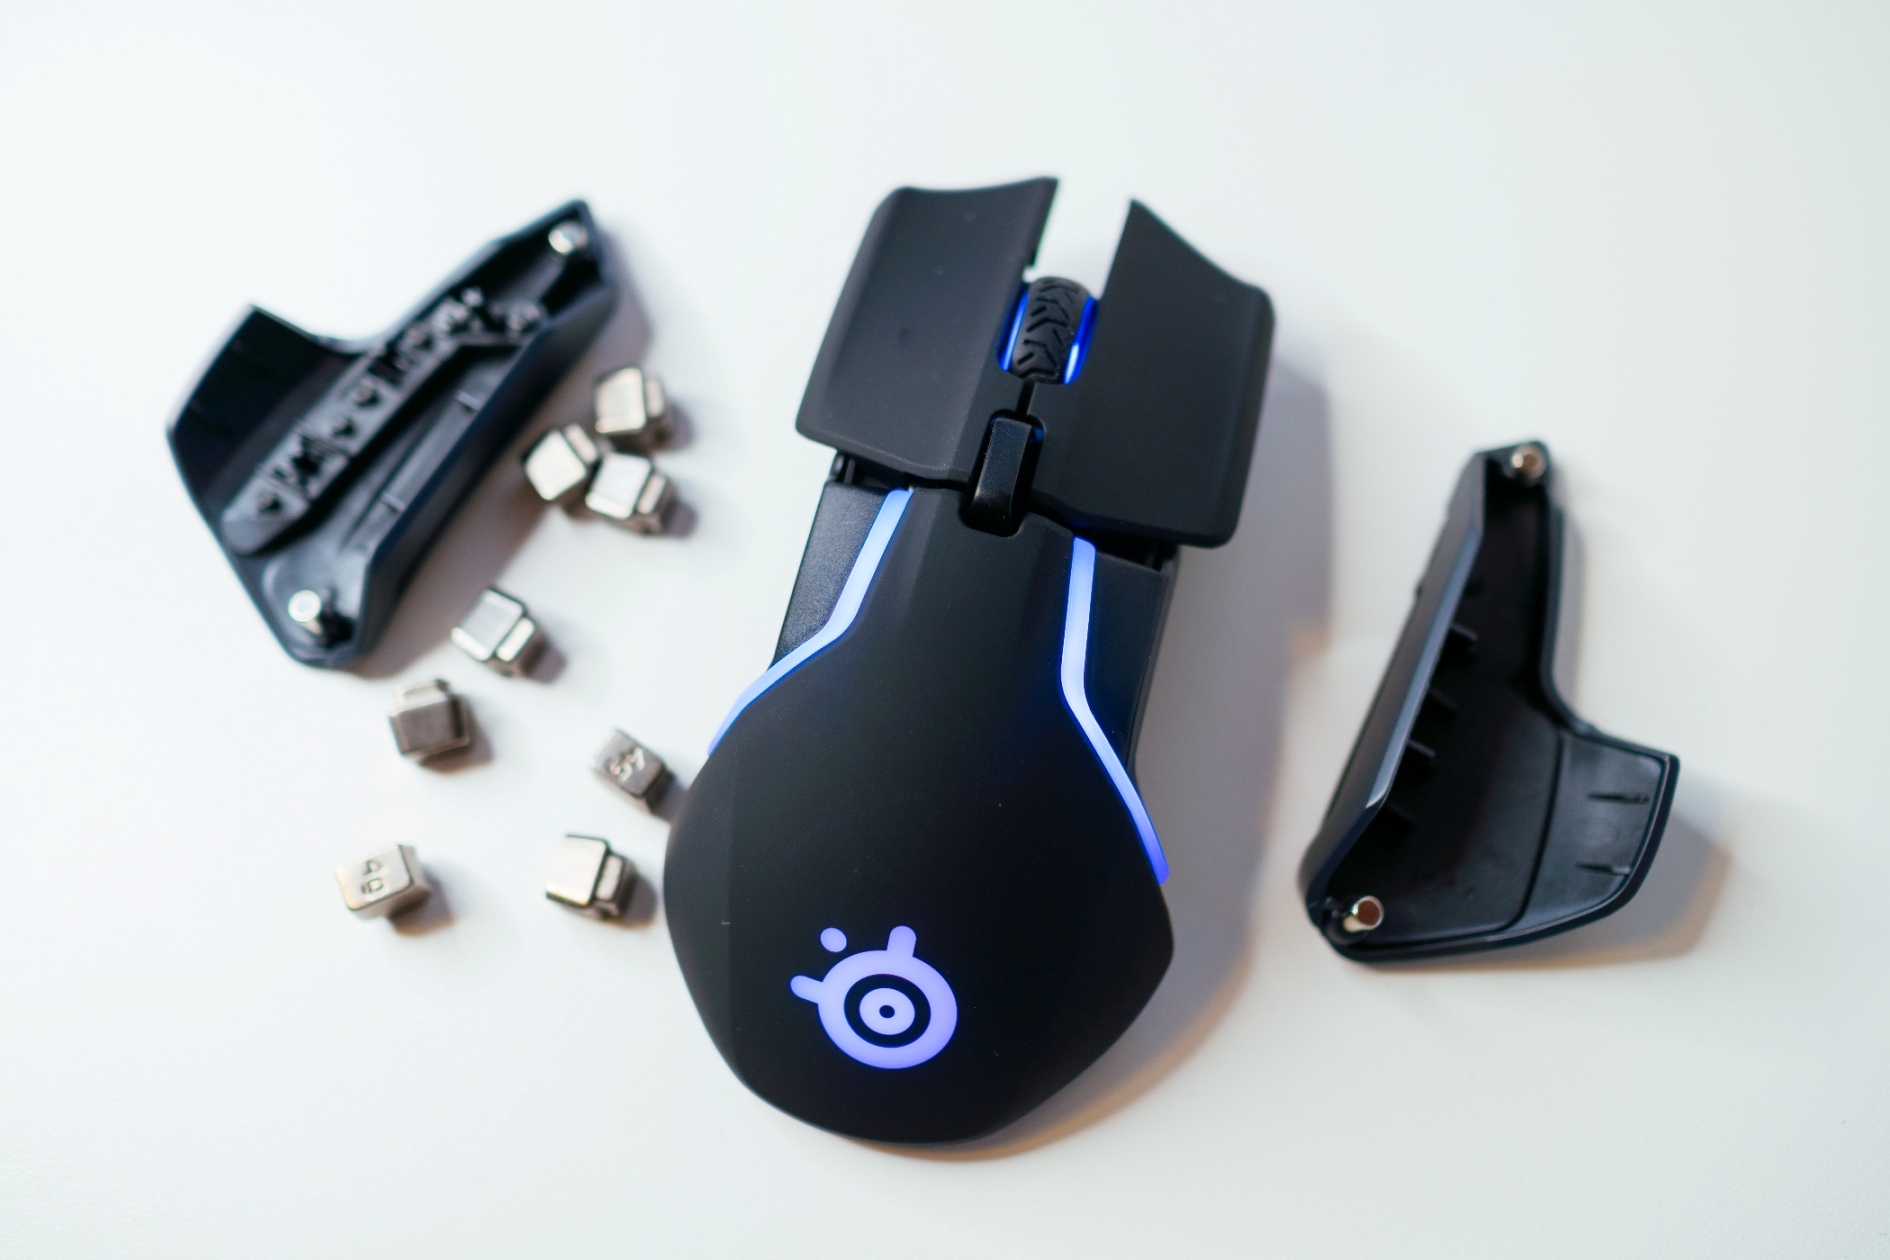 SteelSeries Rival 650 weights